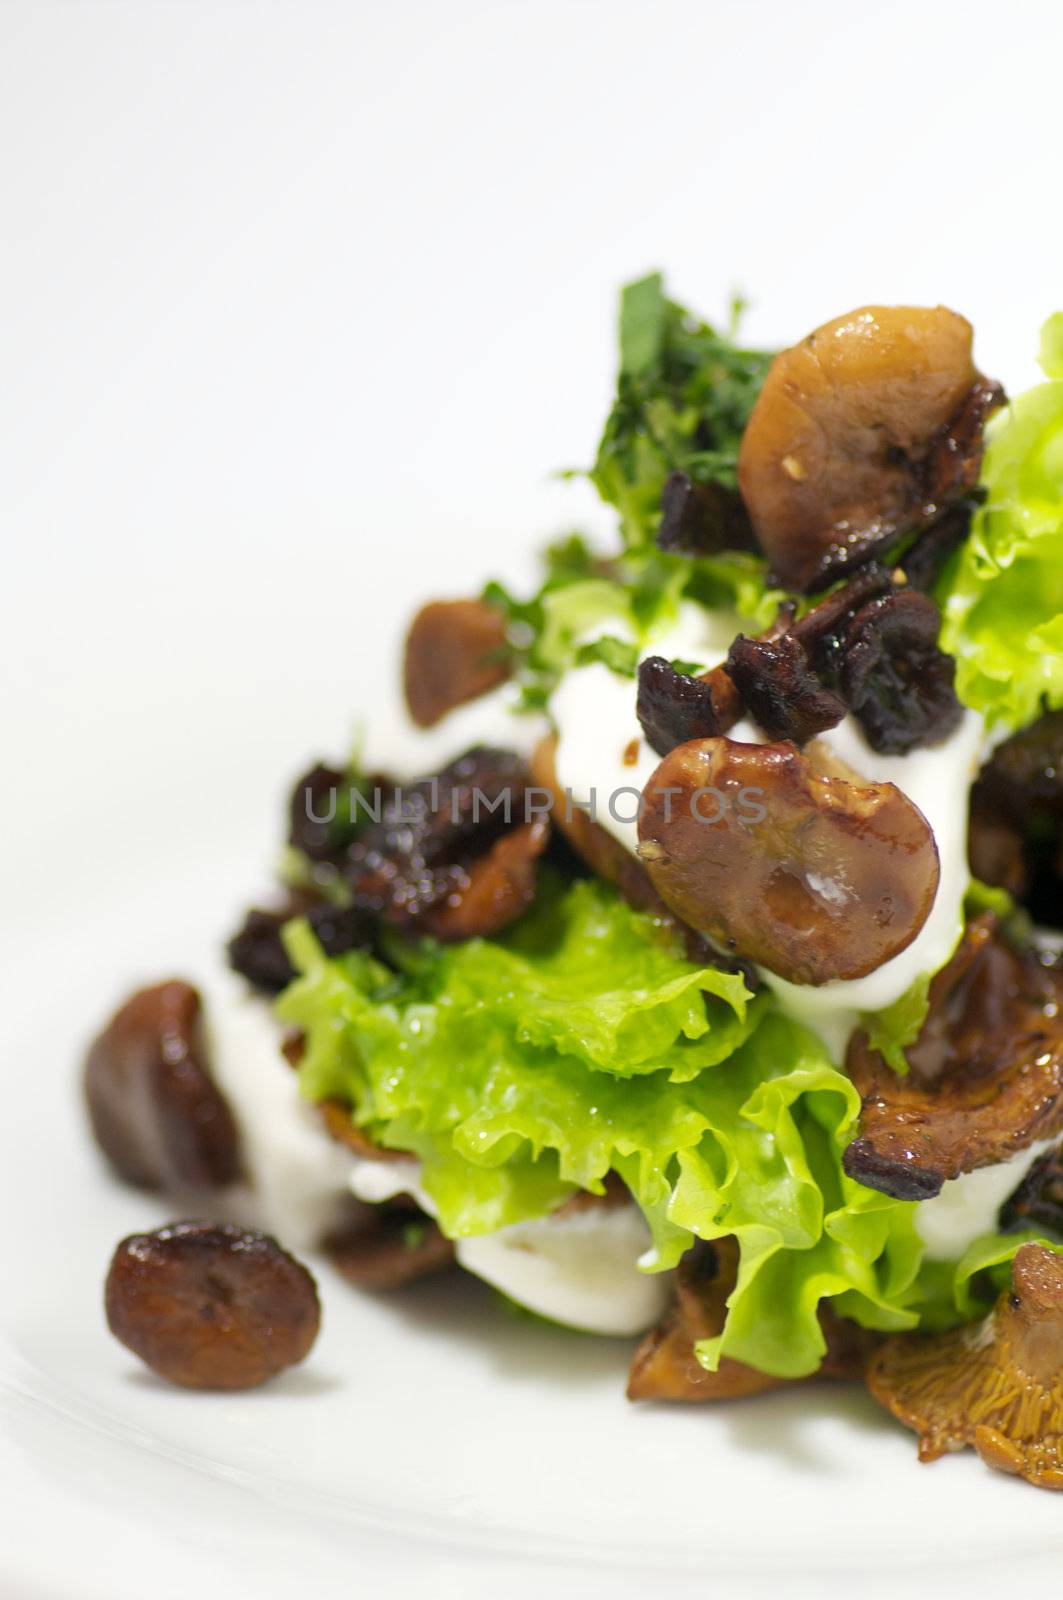 Chanterelles mushrooms with salad leaves and sour cream by zhekos